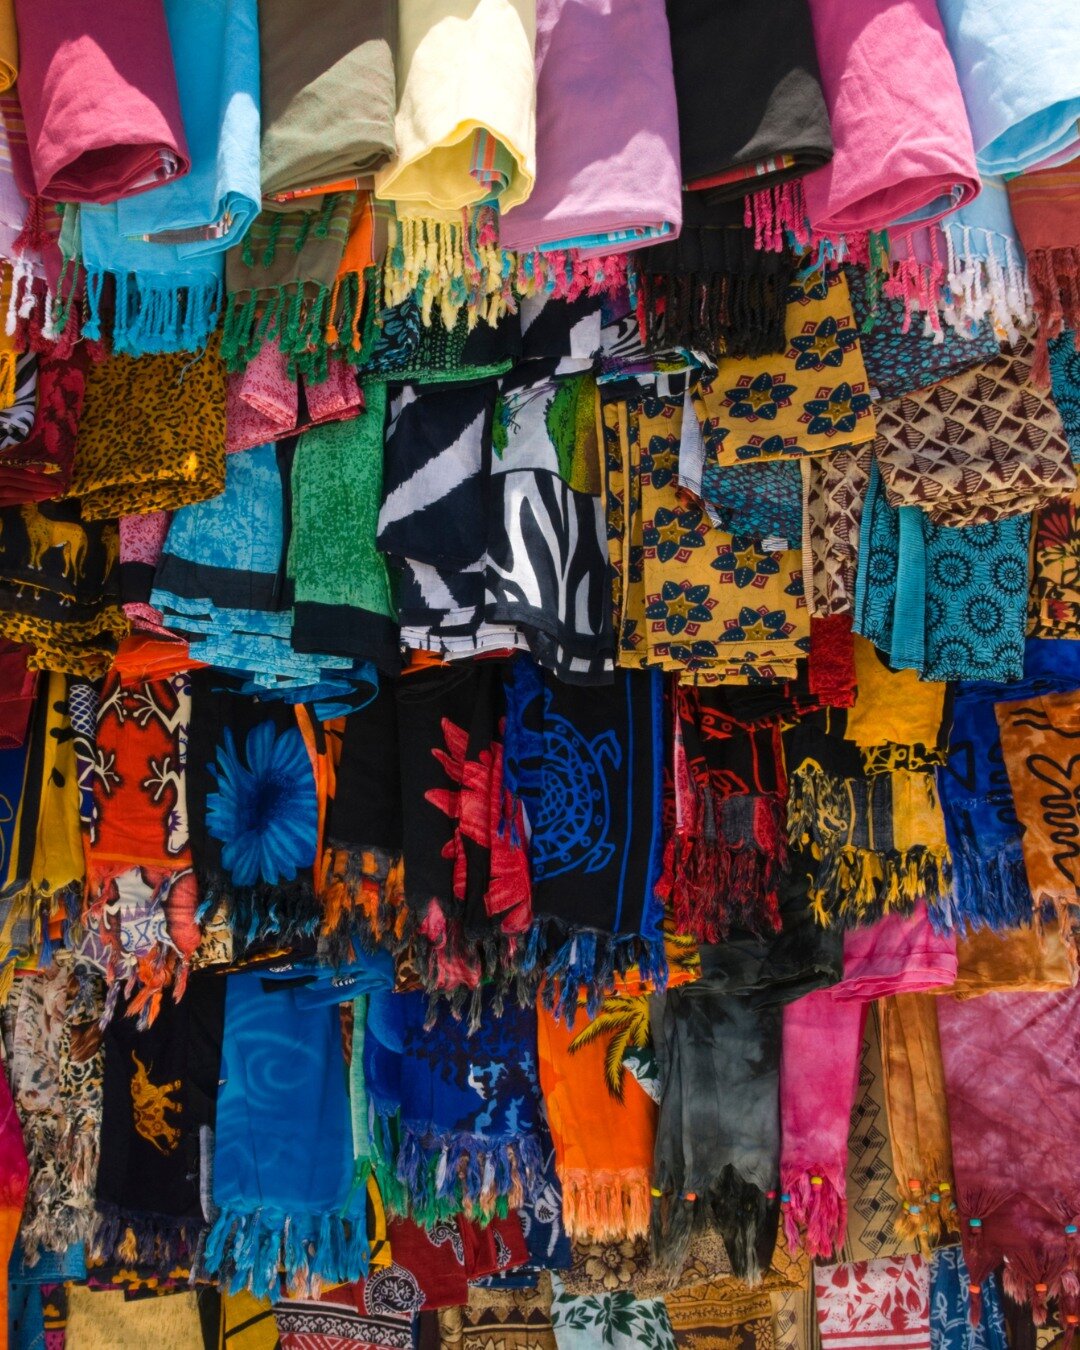 A continent so rich in colour and amazing fabrics! ❤️🧡💛💚💙💙💜🖤🤍

Come and explore it with us today! 

#conservationmatterstravel #conservationmatters #travel #travelafrica #safari #conservation #wildlife #big5 #kenya #holiday #gapyear #beach #m